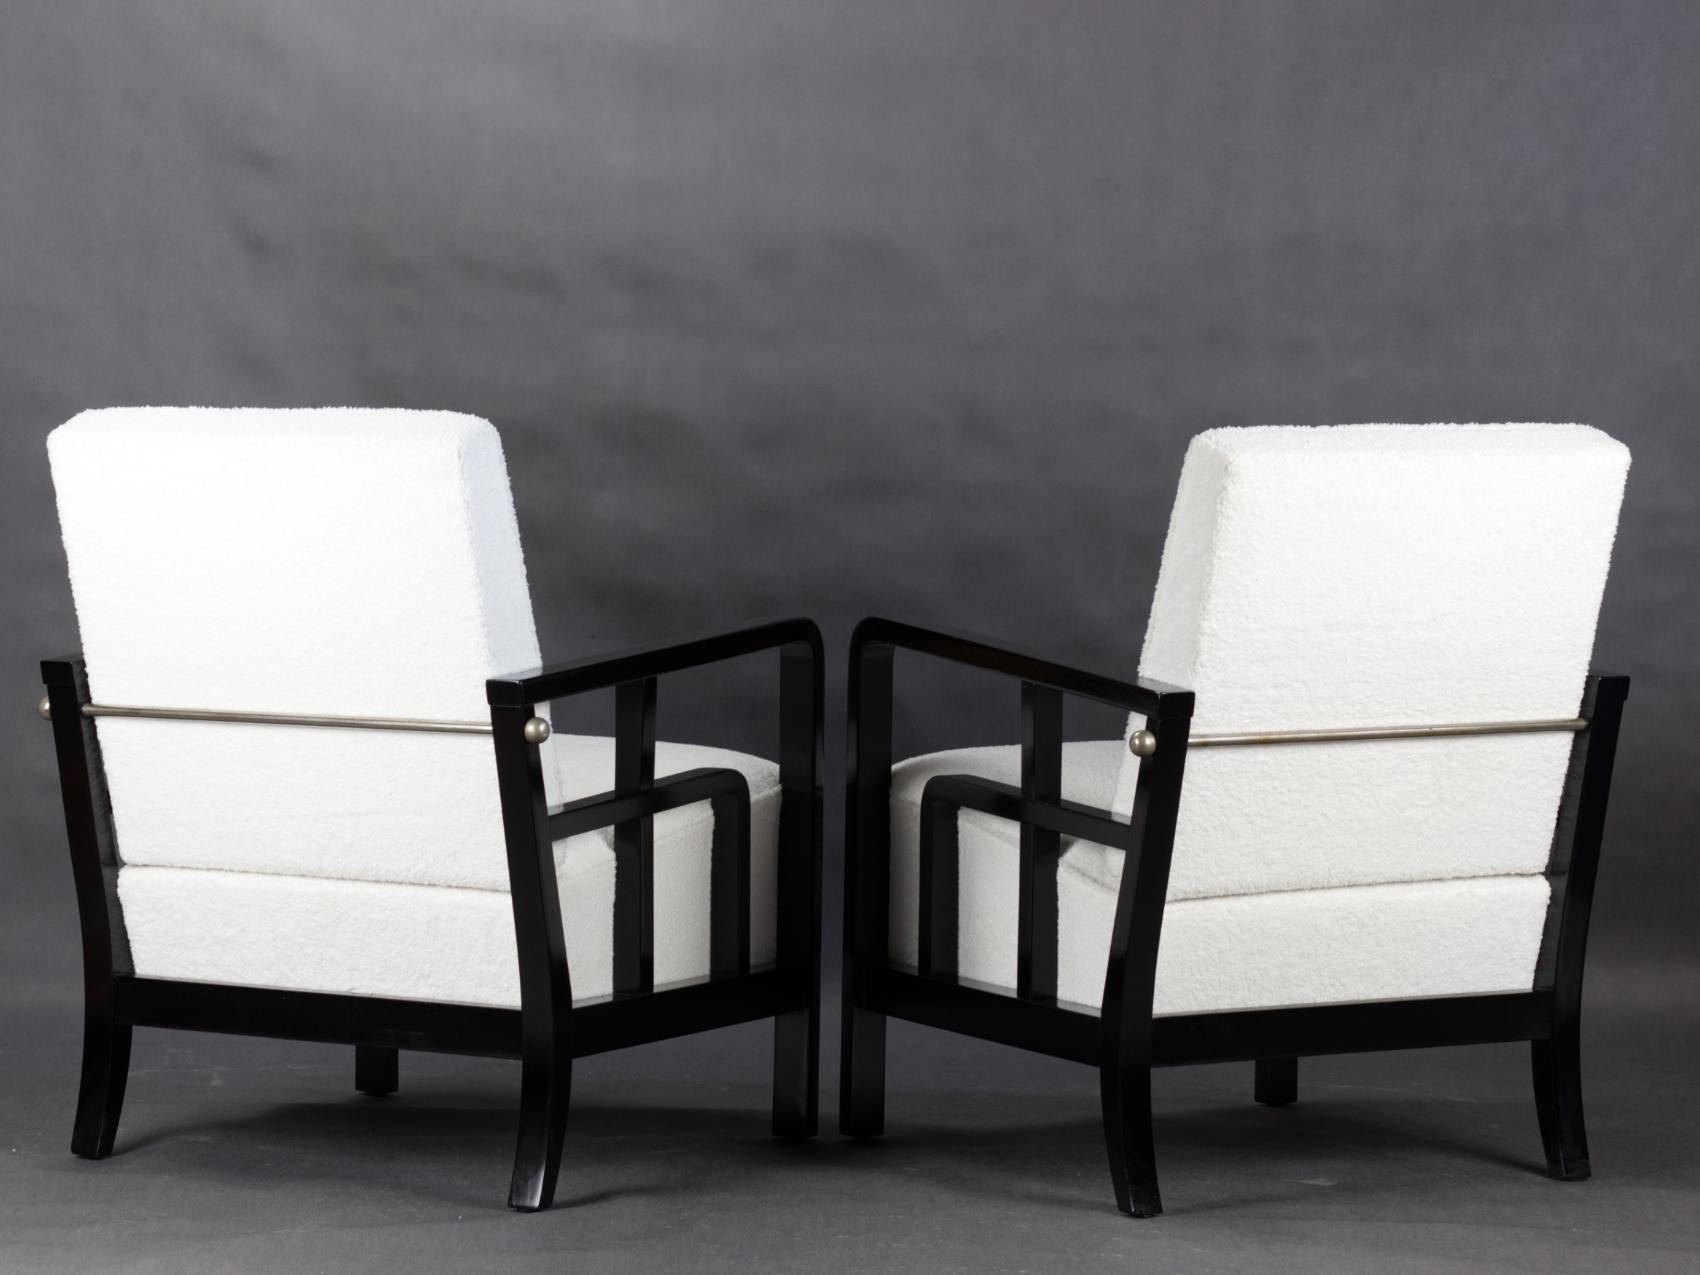 Walnut Fully Restored Pair of Art Deco Lounge Chairs, circa 1930 For Sale